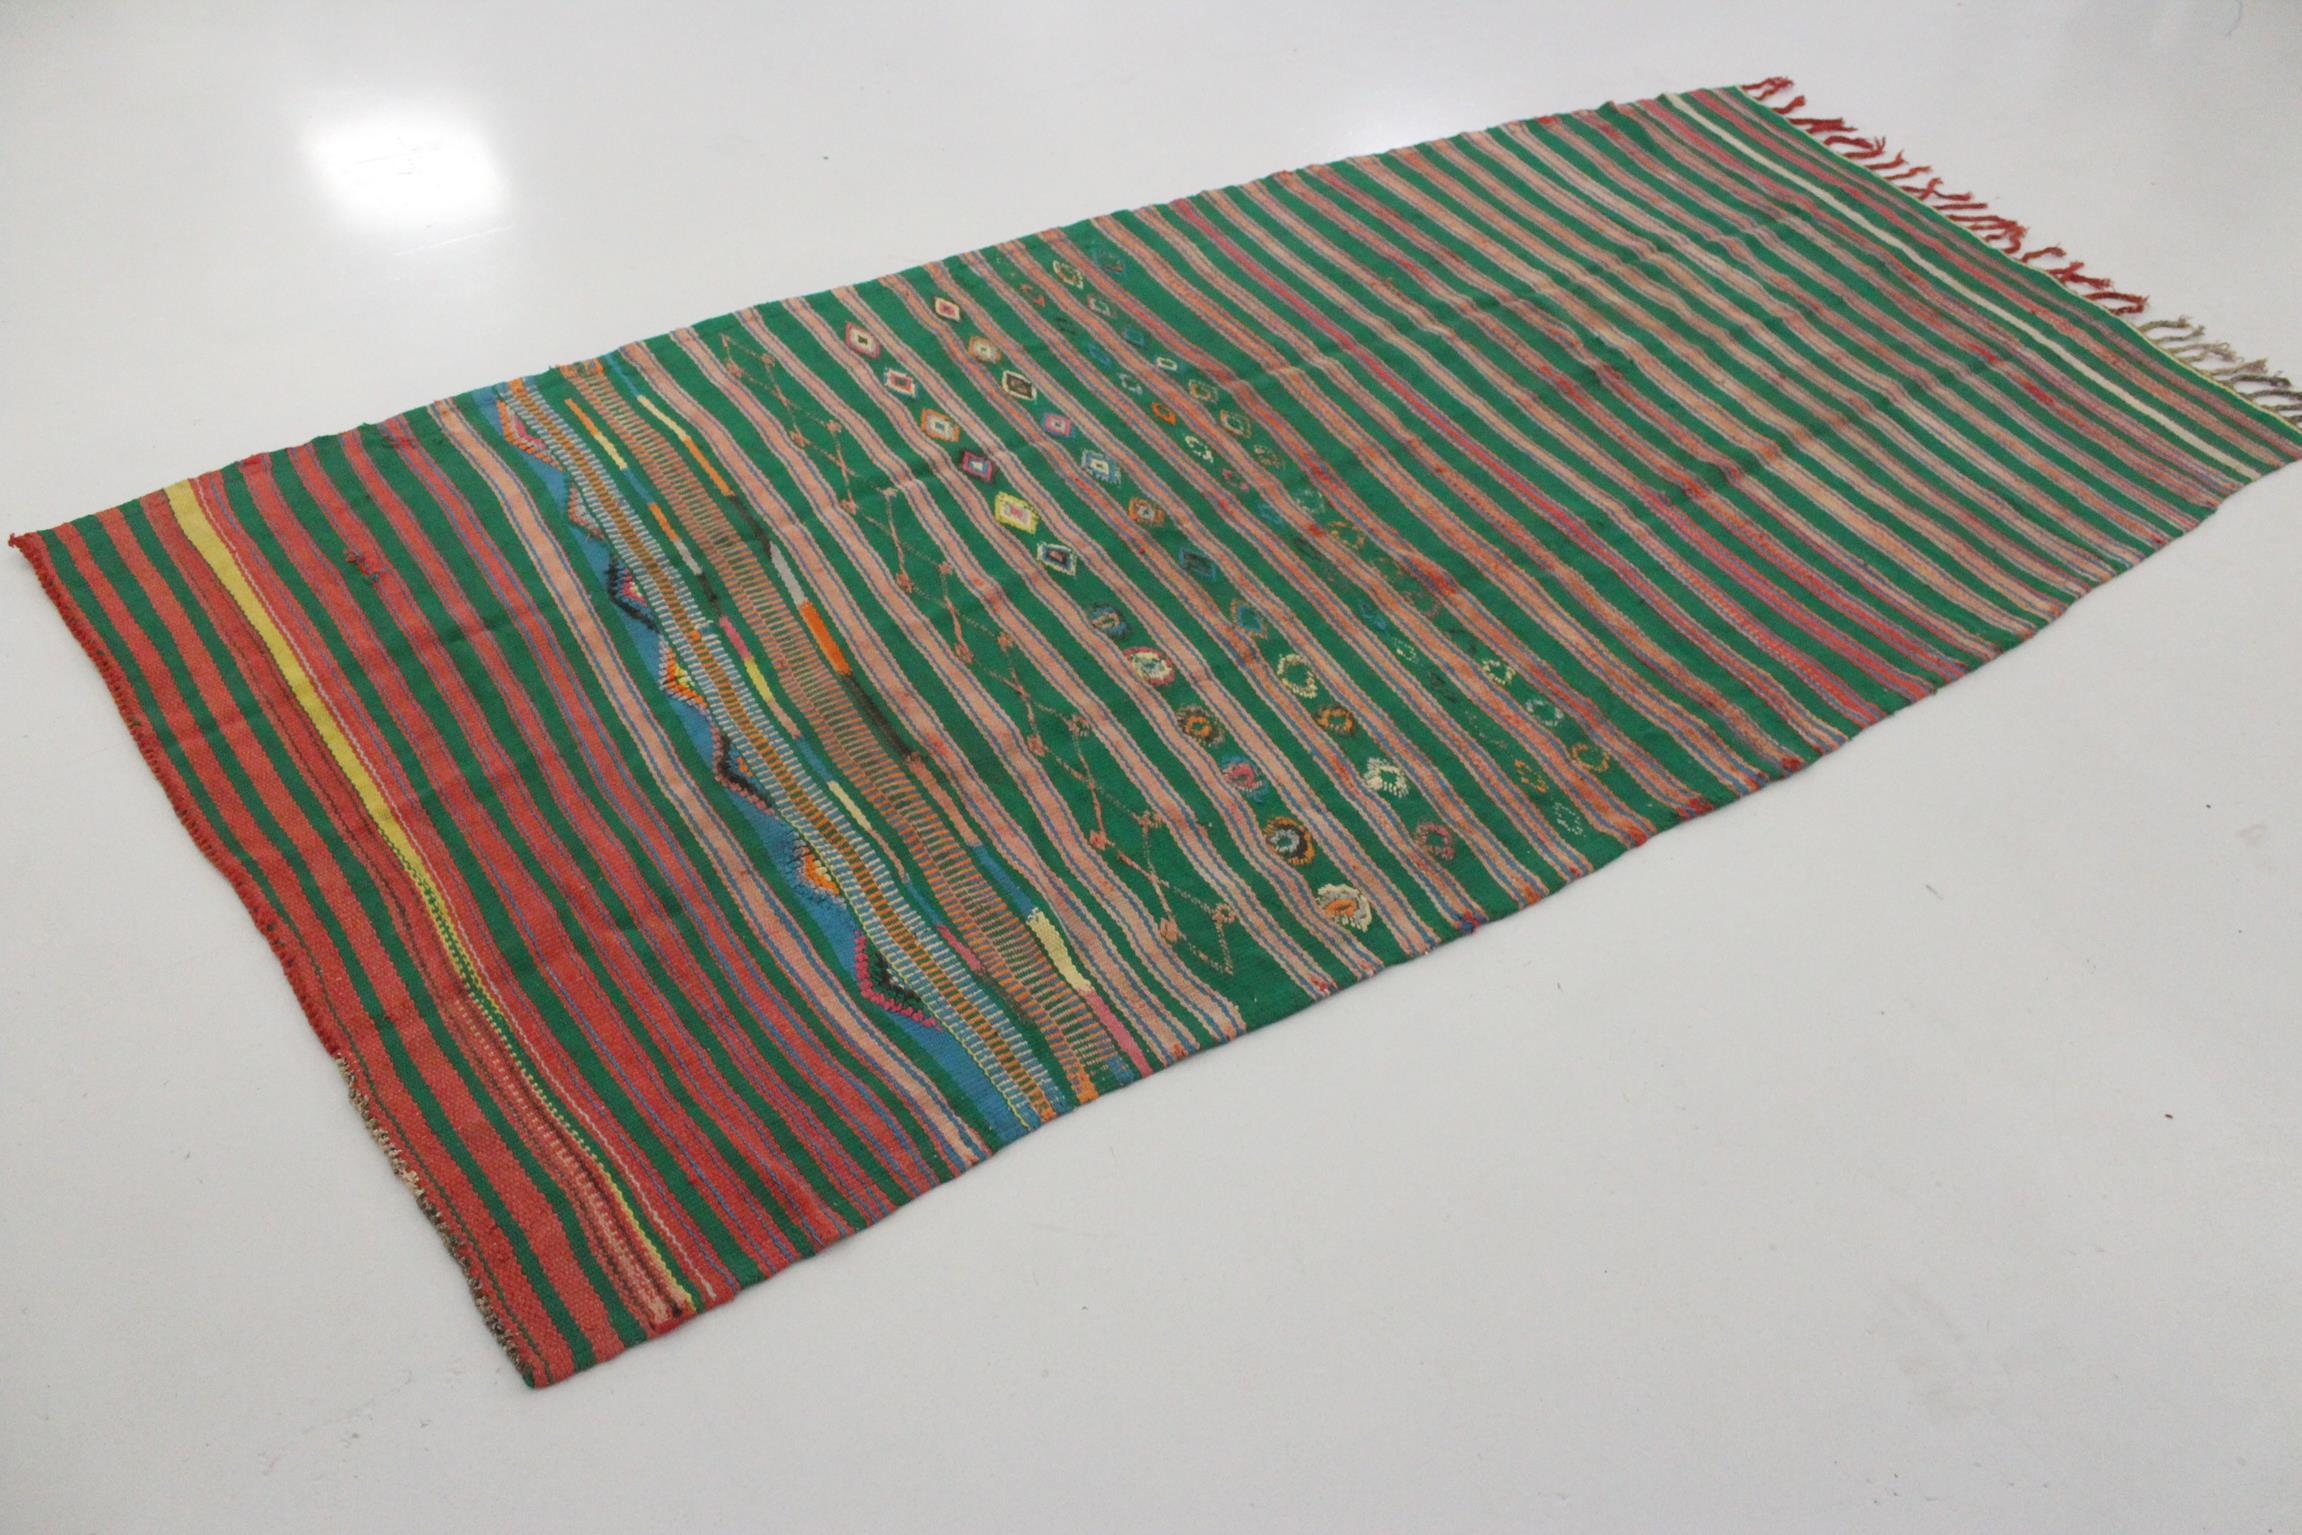 Tribal Vintage Moroccan striped kilim rug - Green/pink/red - 5.1x10.2feet / 157x312cm For Sale